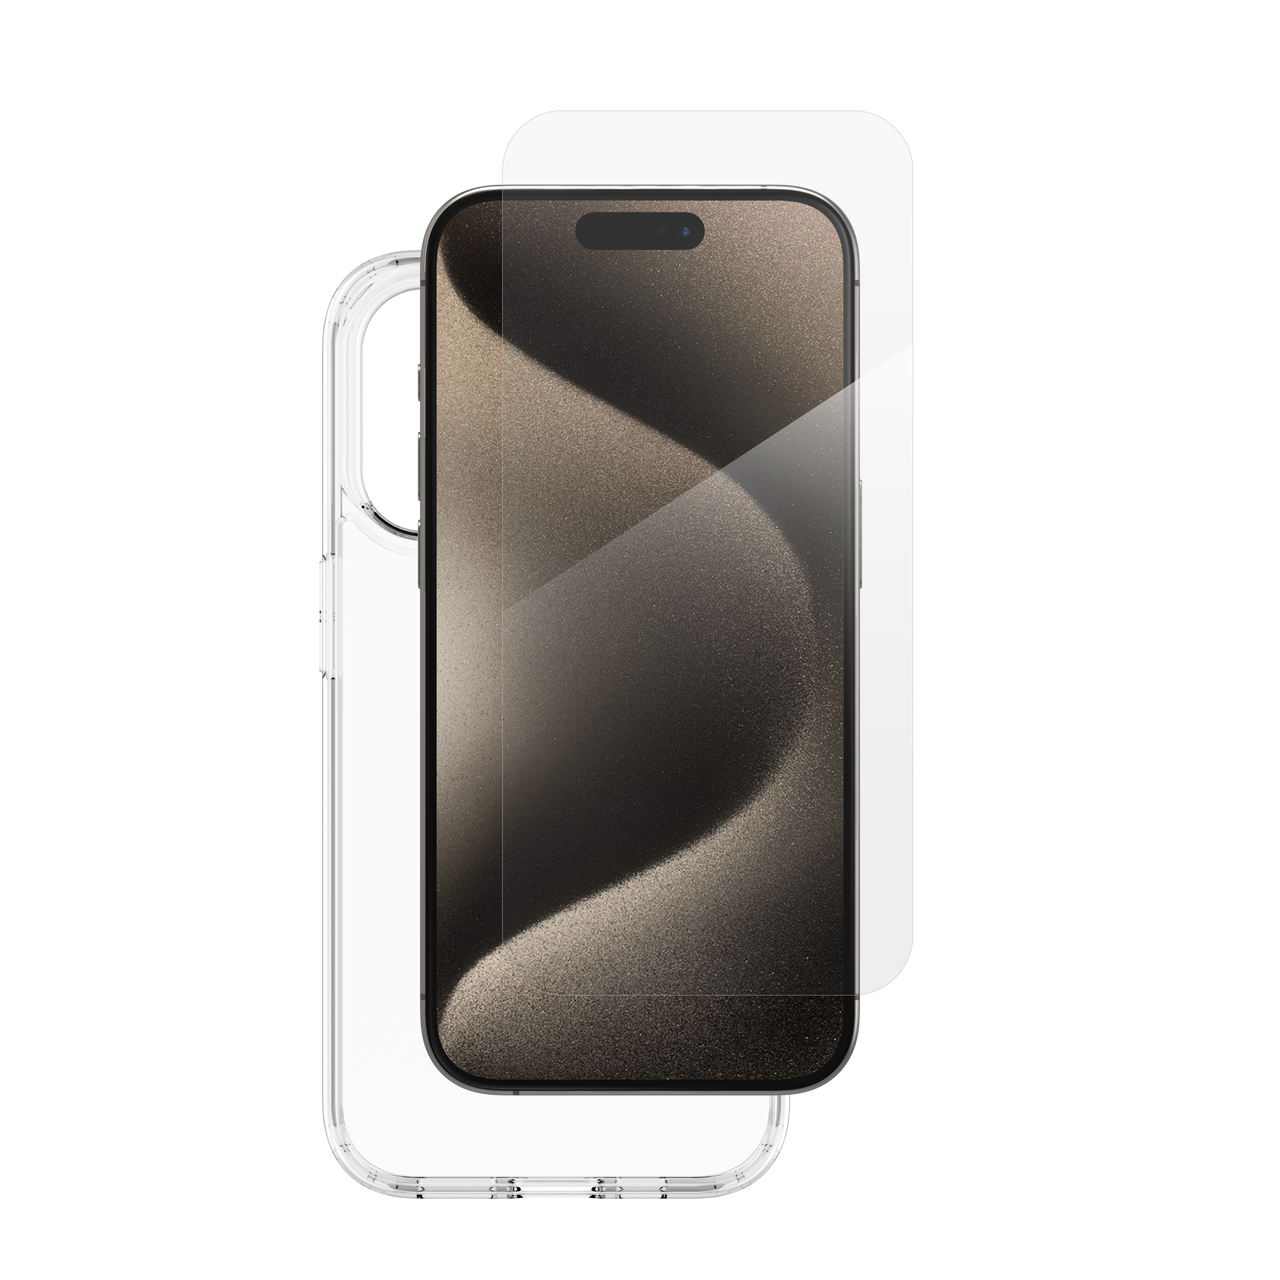 https://cdn11.bigcommerce.com/s-vkwgdkpvsn/images/stencil/1280x1280/products/1146/5564/200511806_ZAGG_InvisibleShield_Glass_Elite_360_Apple_iPhone_15_Pro_Bundle_Front_Device__94321.1694601898.png?c=1